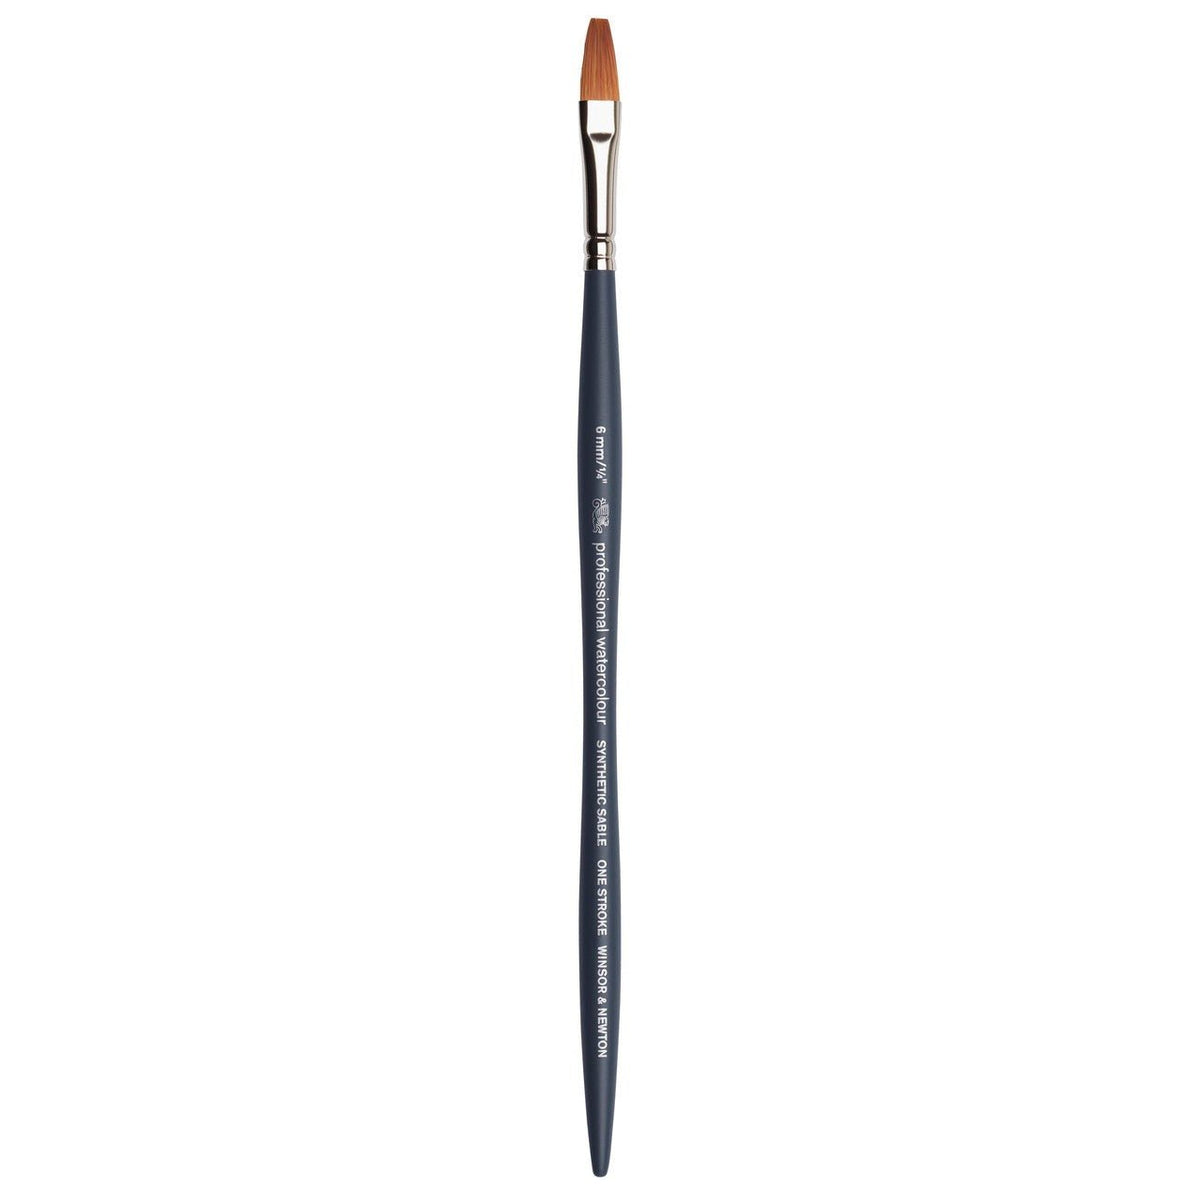 Winsor & Newton Professional Watercolor Synthetic Sable Brush, Rigger, 6